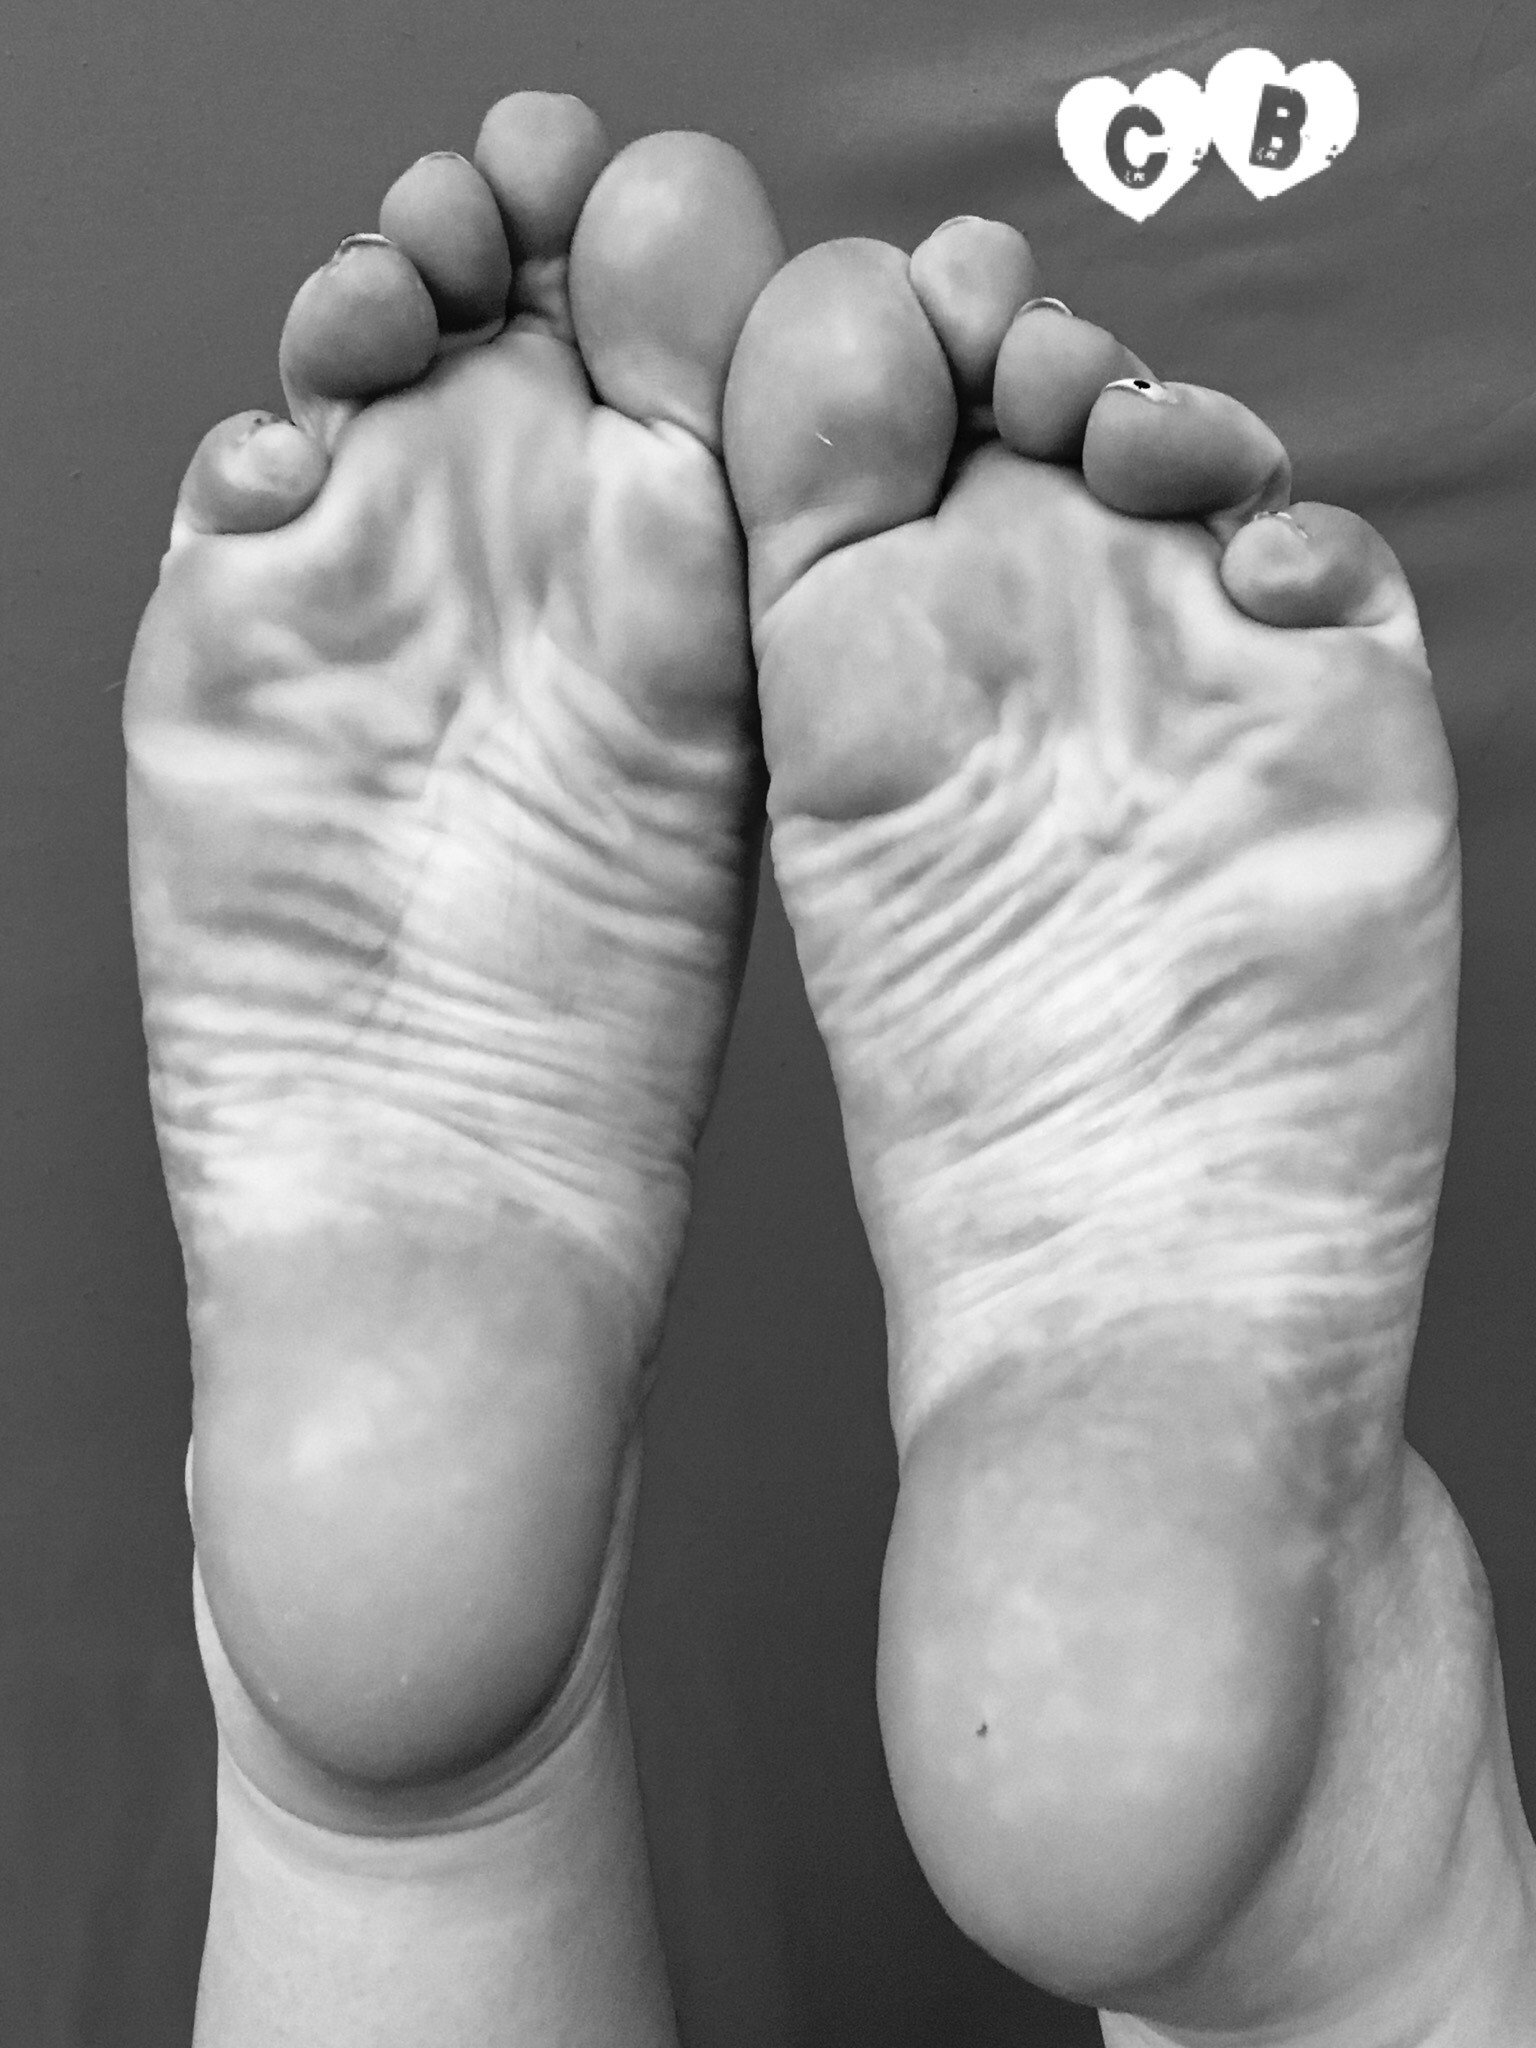 Photo by CamgirlBrielle with the username @CamgirlBrielle,  September 29, 2019 at 3:18 PM. The post is about the topic Foot Fetish and the text says '#Soles #Toes #Feet #Foot #FootFetish'